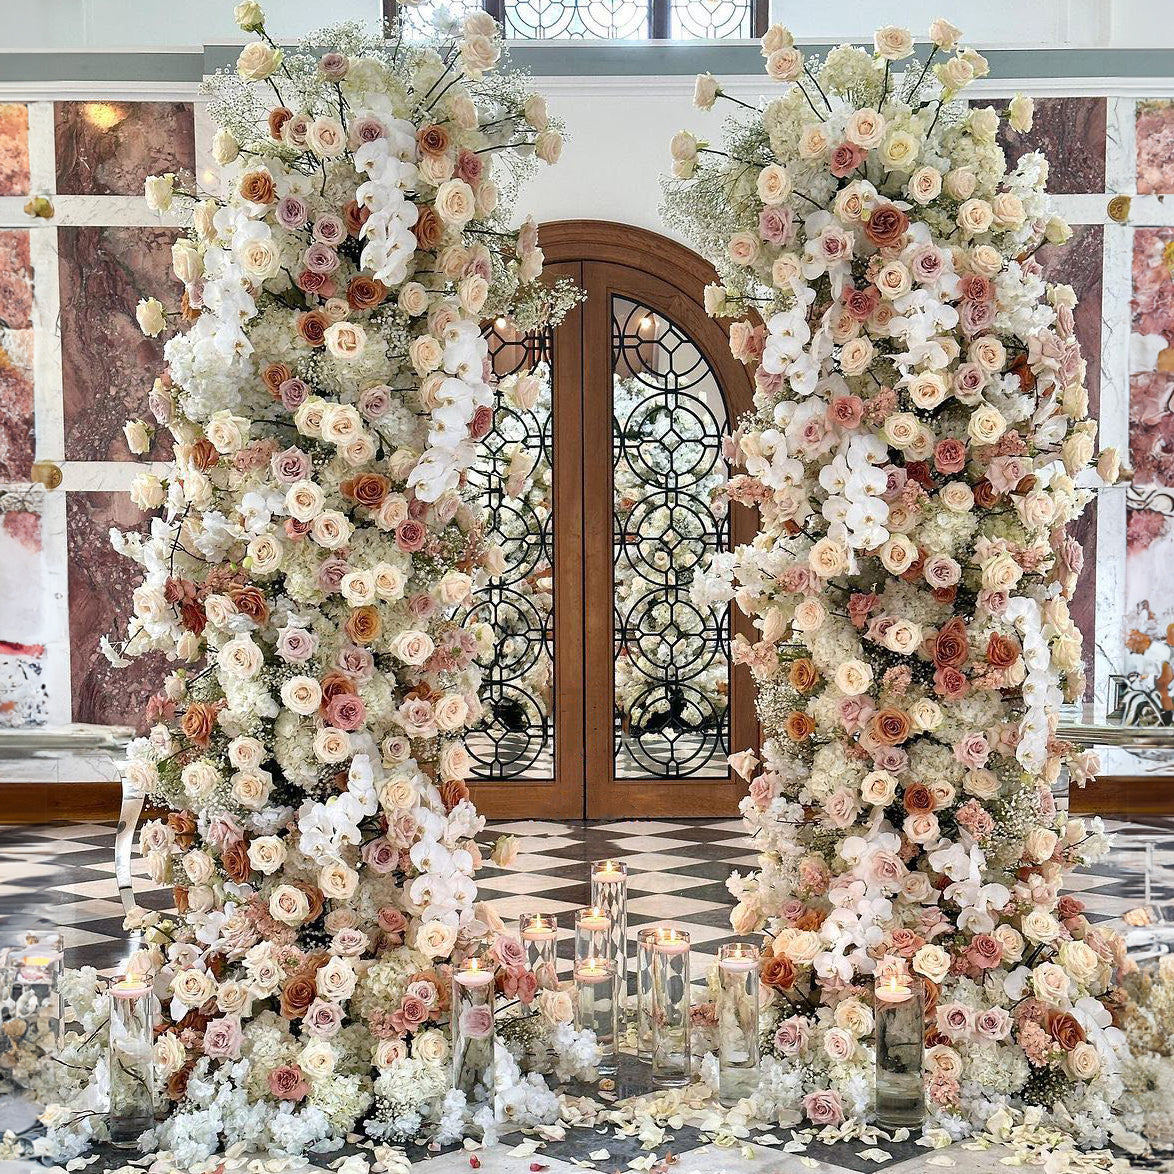 Bonnie : 2023 New Wedding Party Background Floral Arch Decoration Including Frame -R859 is an elegant and beautiful floral arch, perfect for weddings or other events. The flower arch is made of high-quality artificial flowers and decorated with a metal frame. Big enough for your guests to take pictures and keep. It&